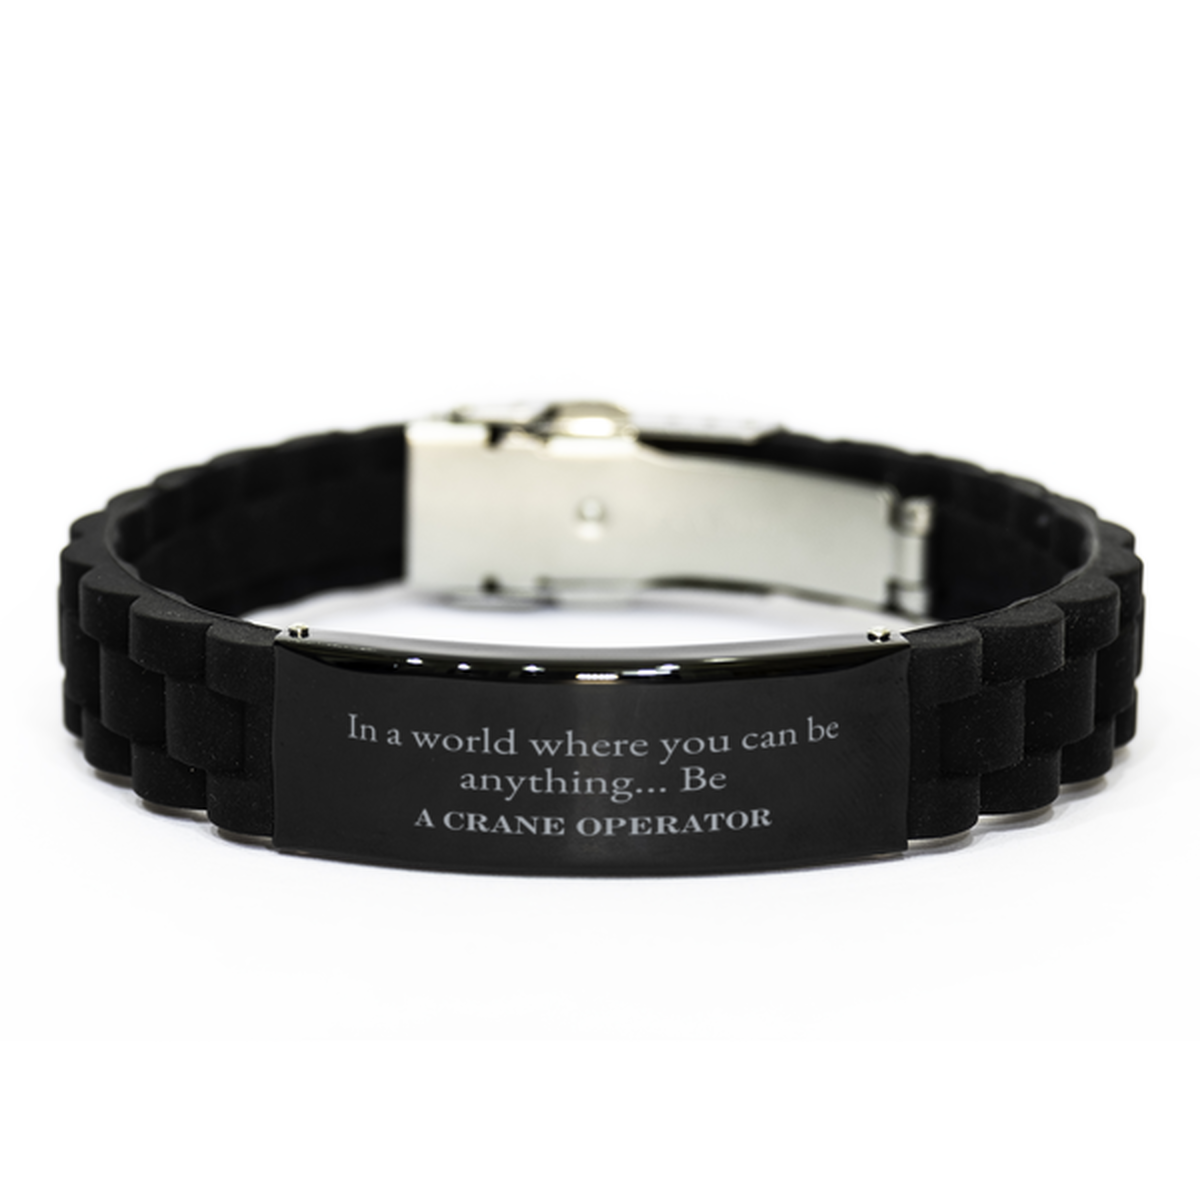 Gifts for Crane Operator, In a world where you can be anything, Appreciation Birthday Black Glidelock Clasp Bracelet for Men, Women, Friends, Coworkers